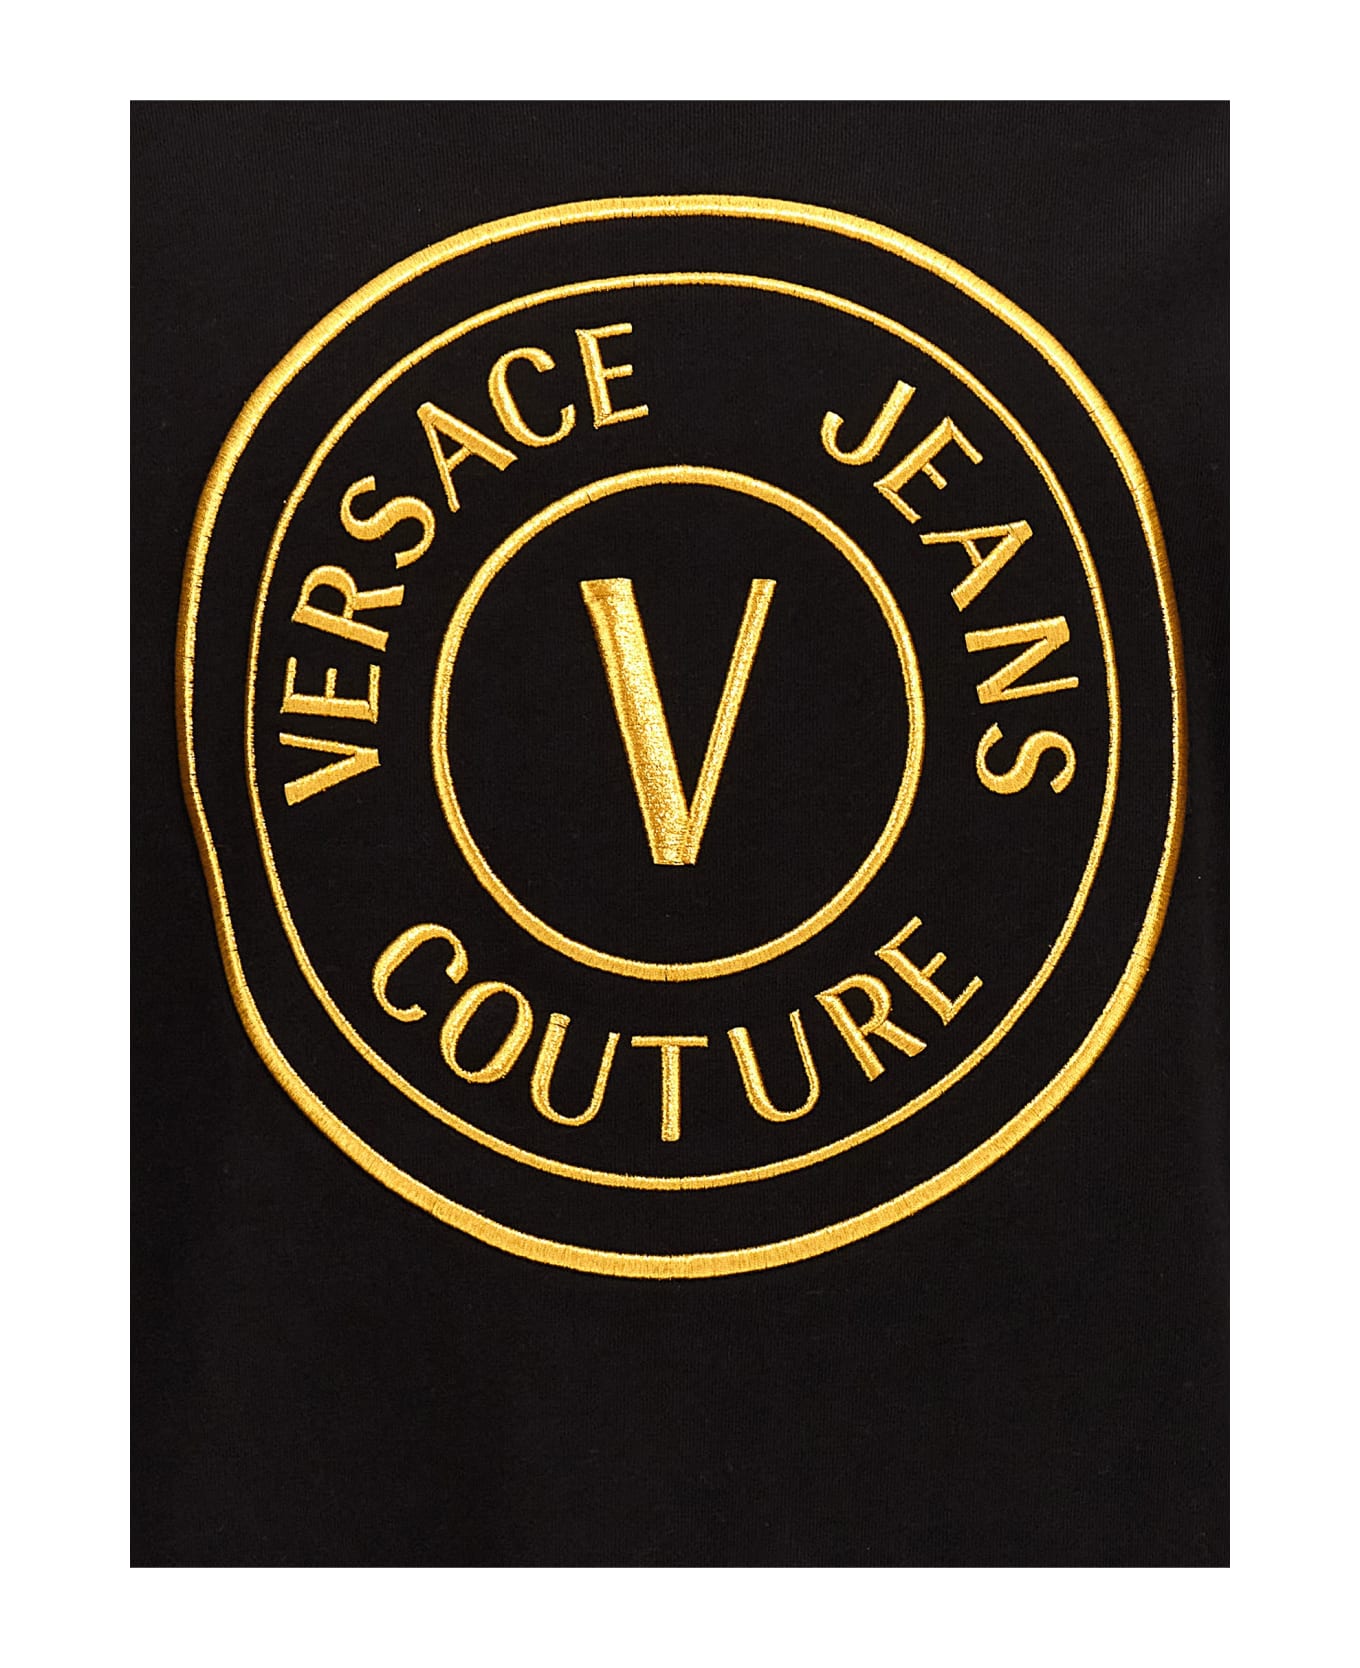 Versace Jeans Couture Logo Embroidered Rib Sweatshirt - BLACK/GOLD